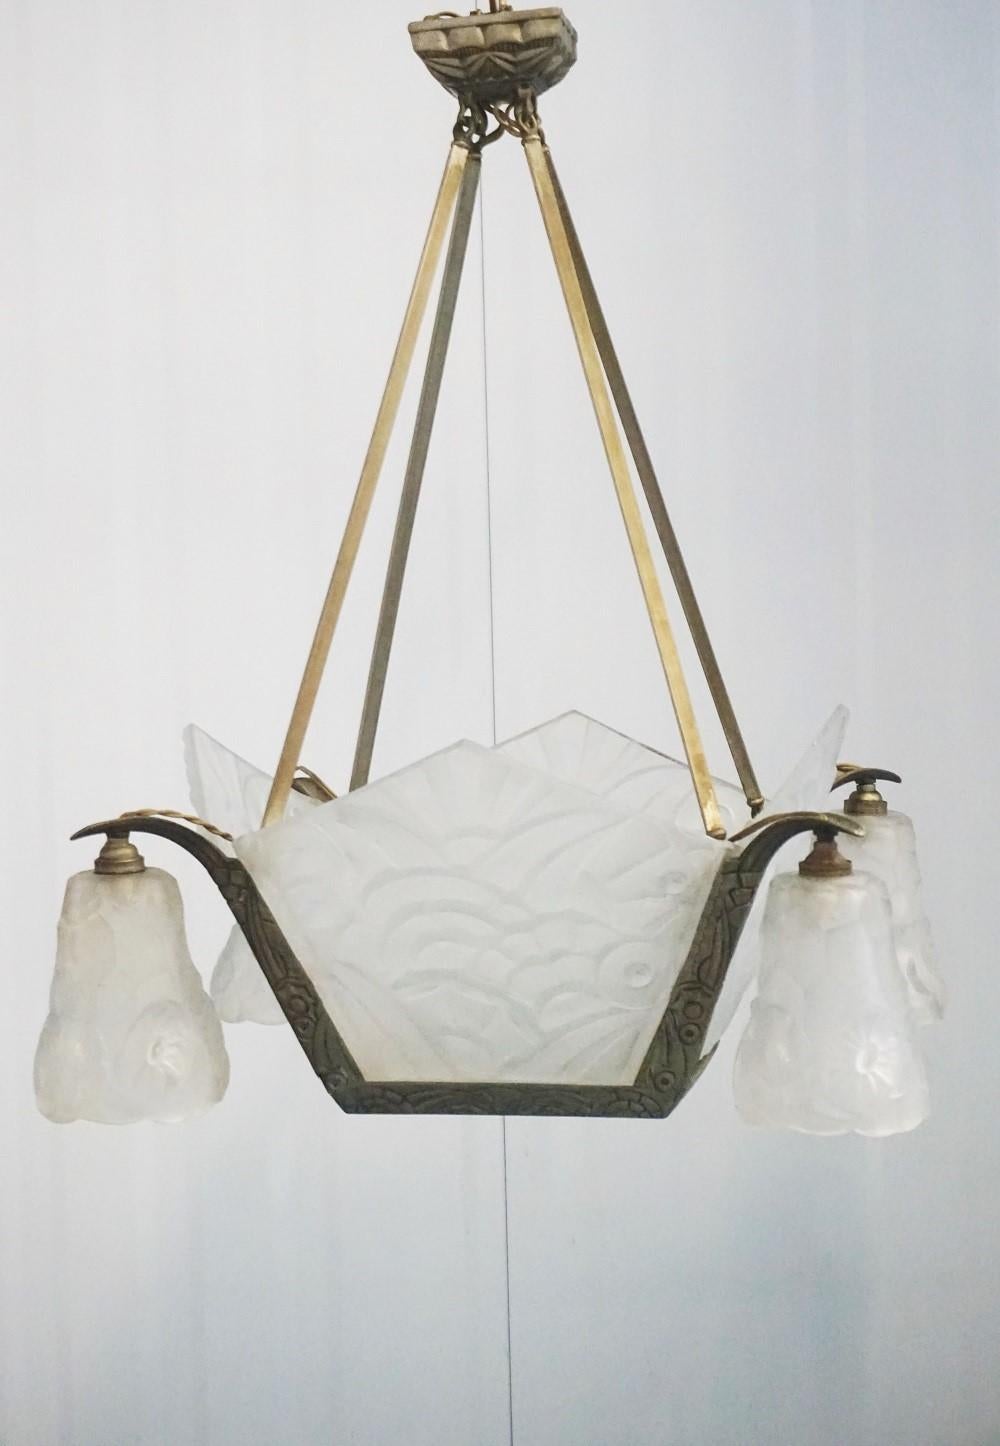 French Art Deco chandelier by Degue with four heavy clear frosted glass geometric side panels and four tulip shades with floral motifs, nickel-plated structure. Glass panels and shades are signed 